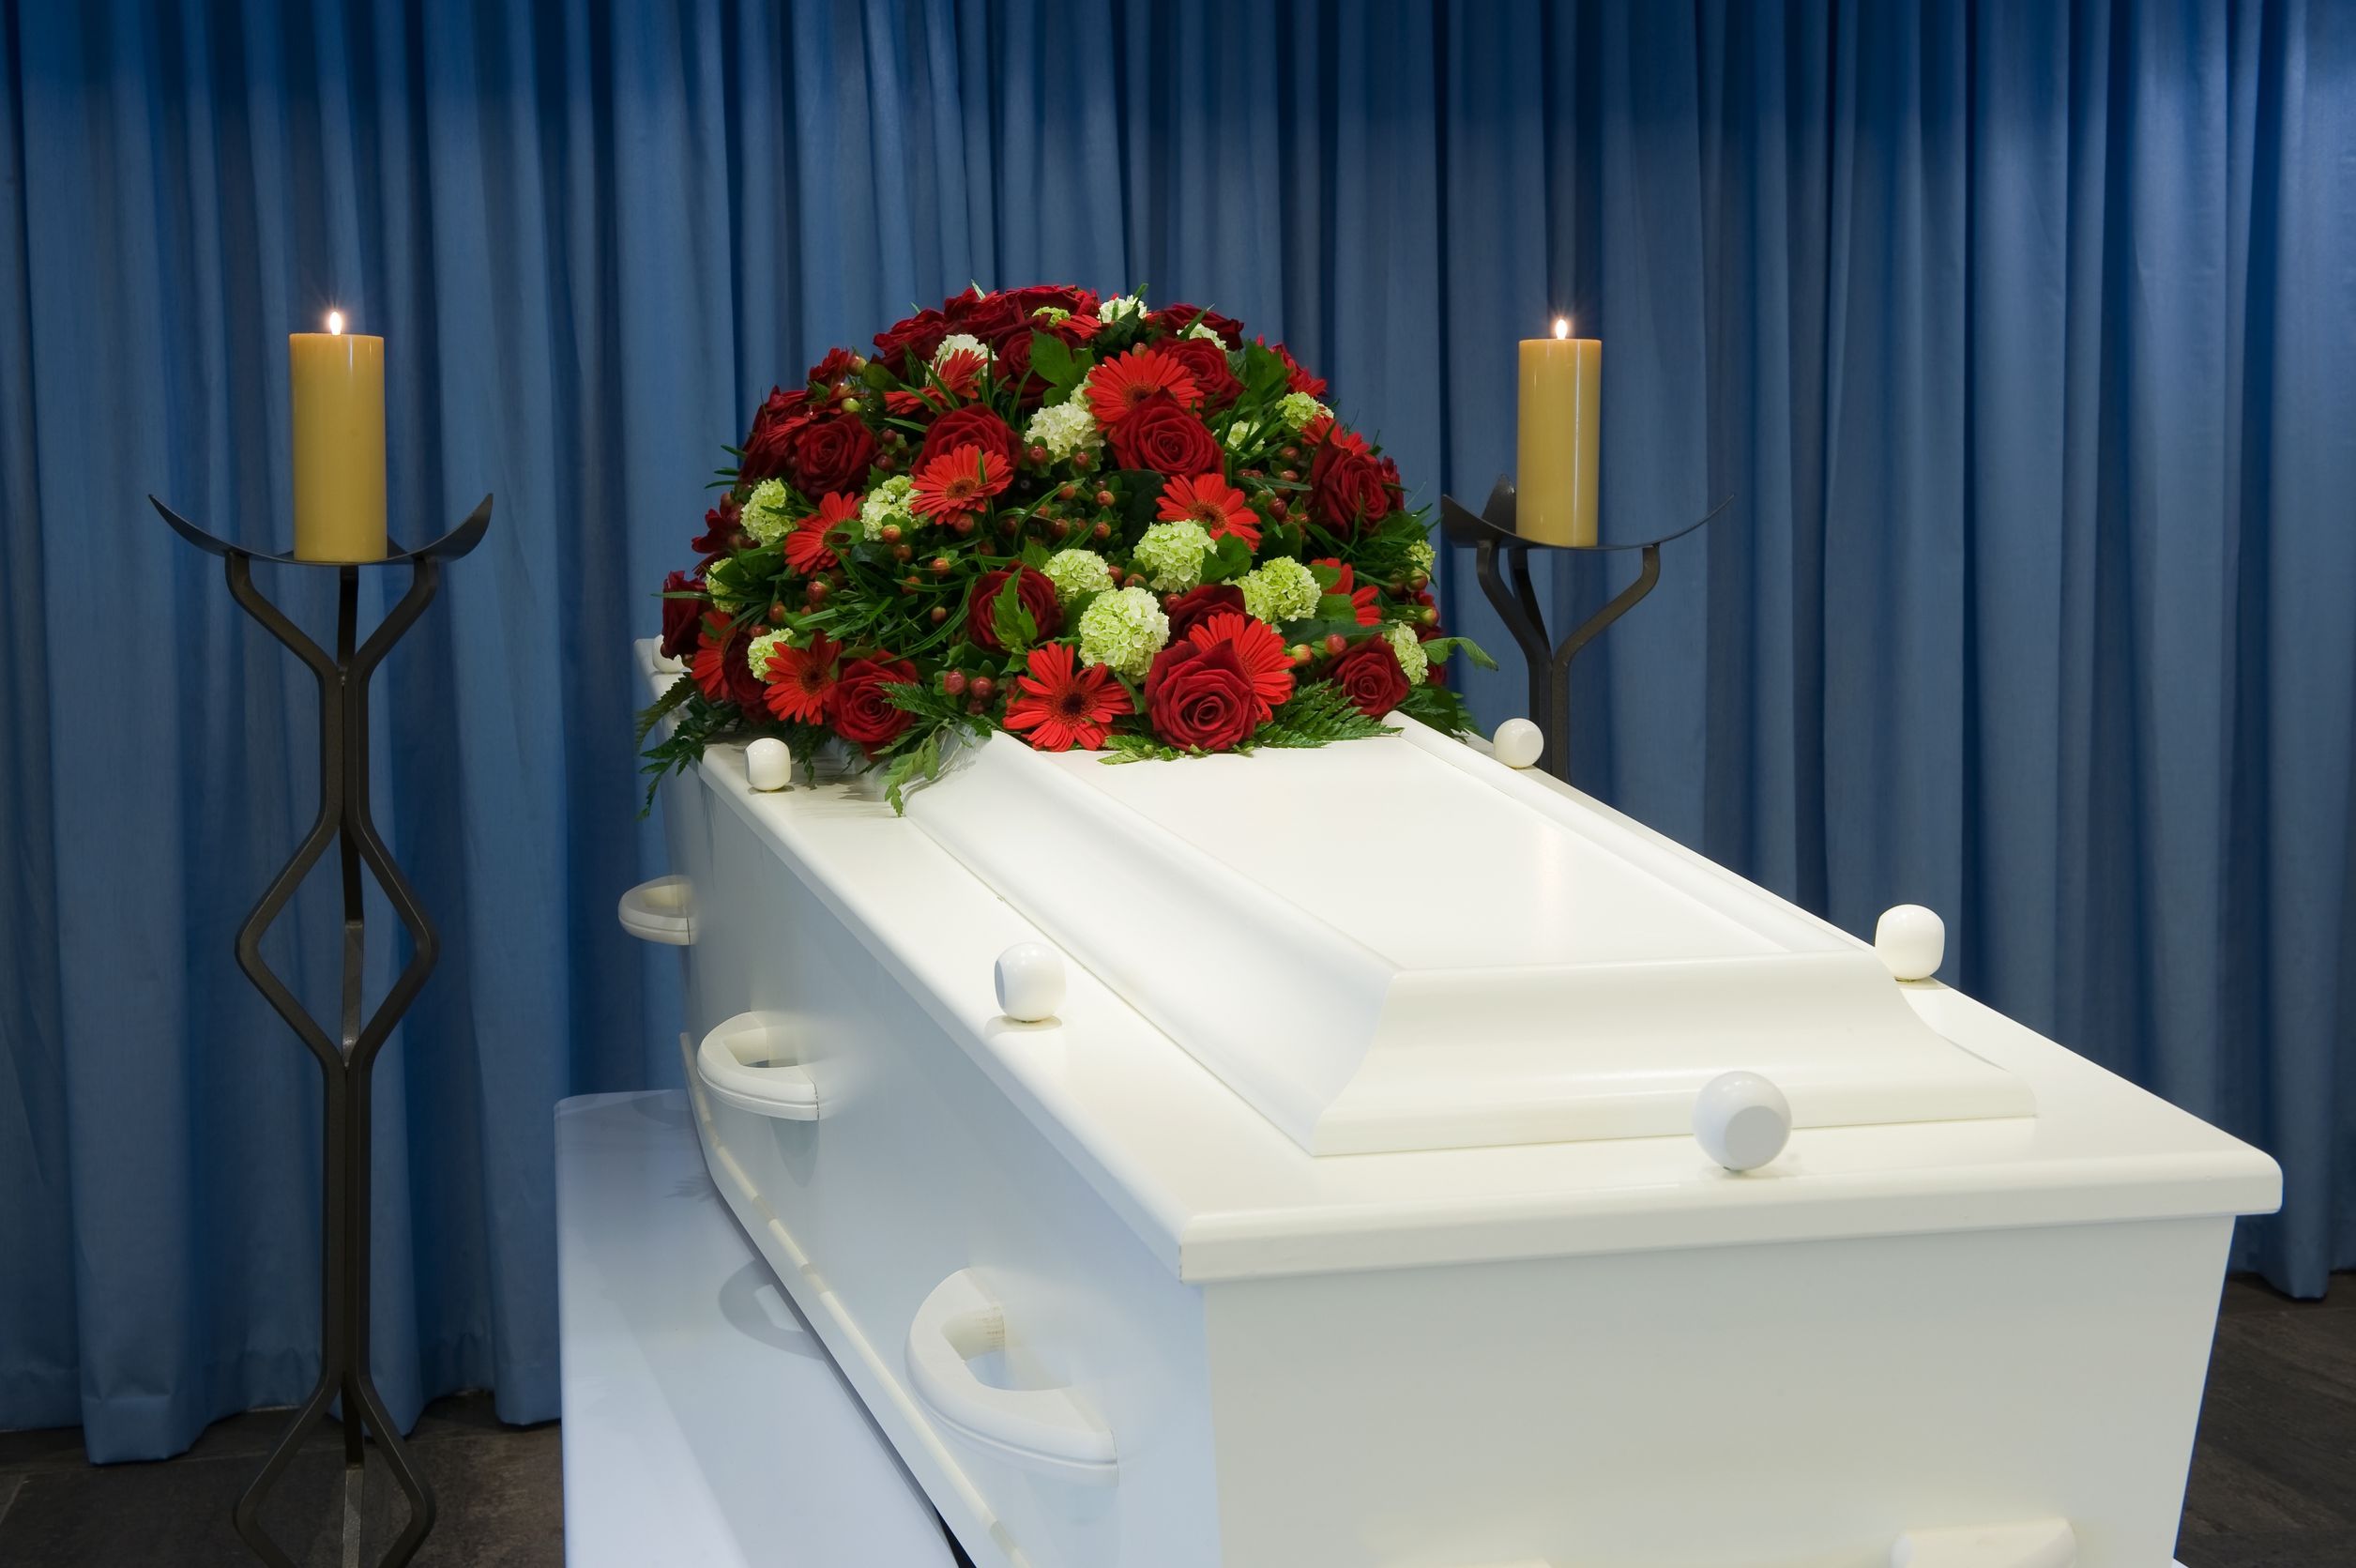 If You Need a Provider for Cremation Antioch is Served by Compassionate Professionals